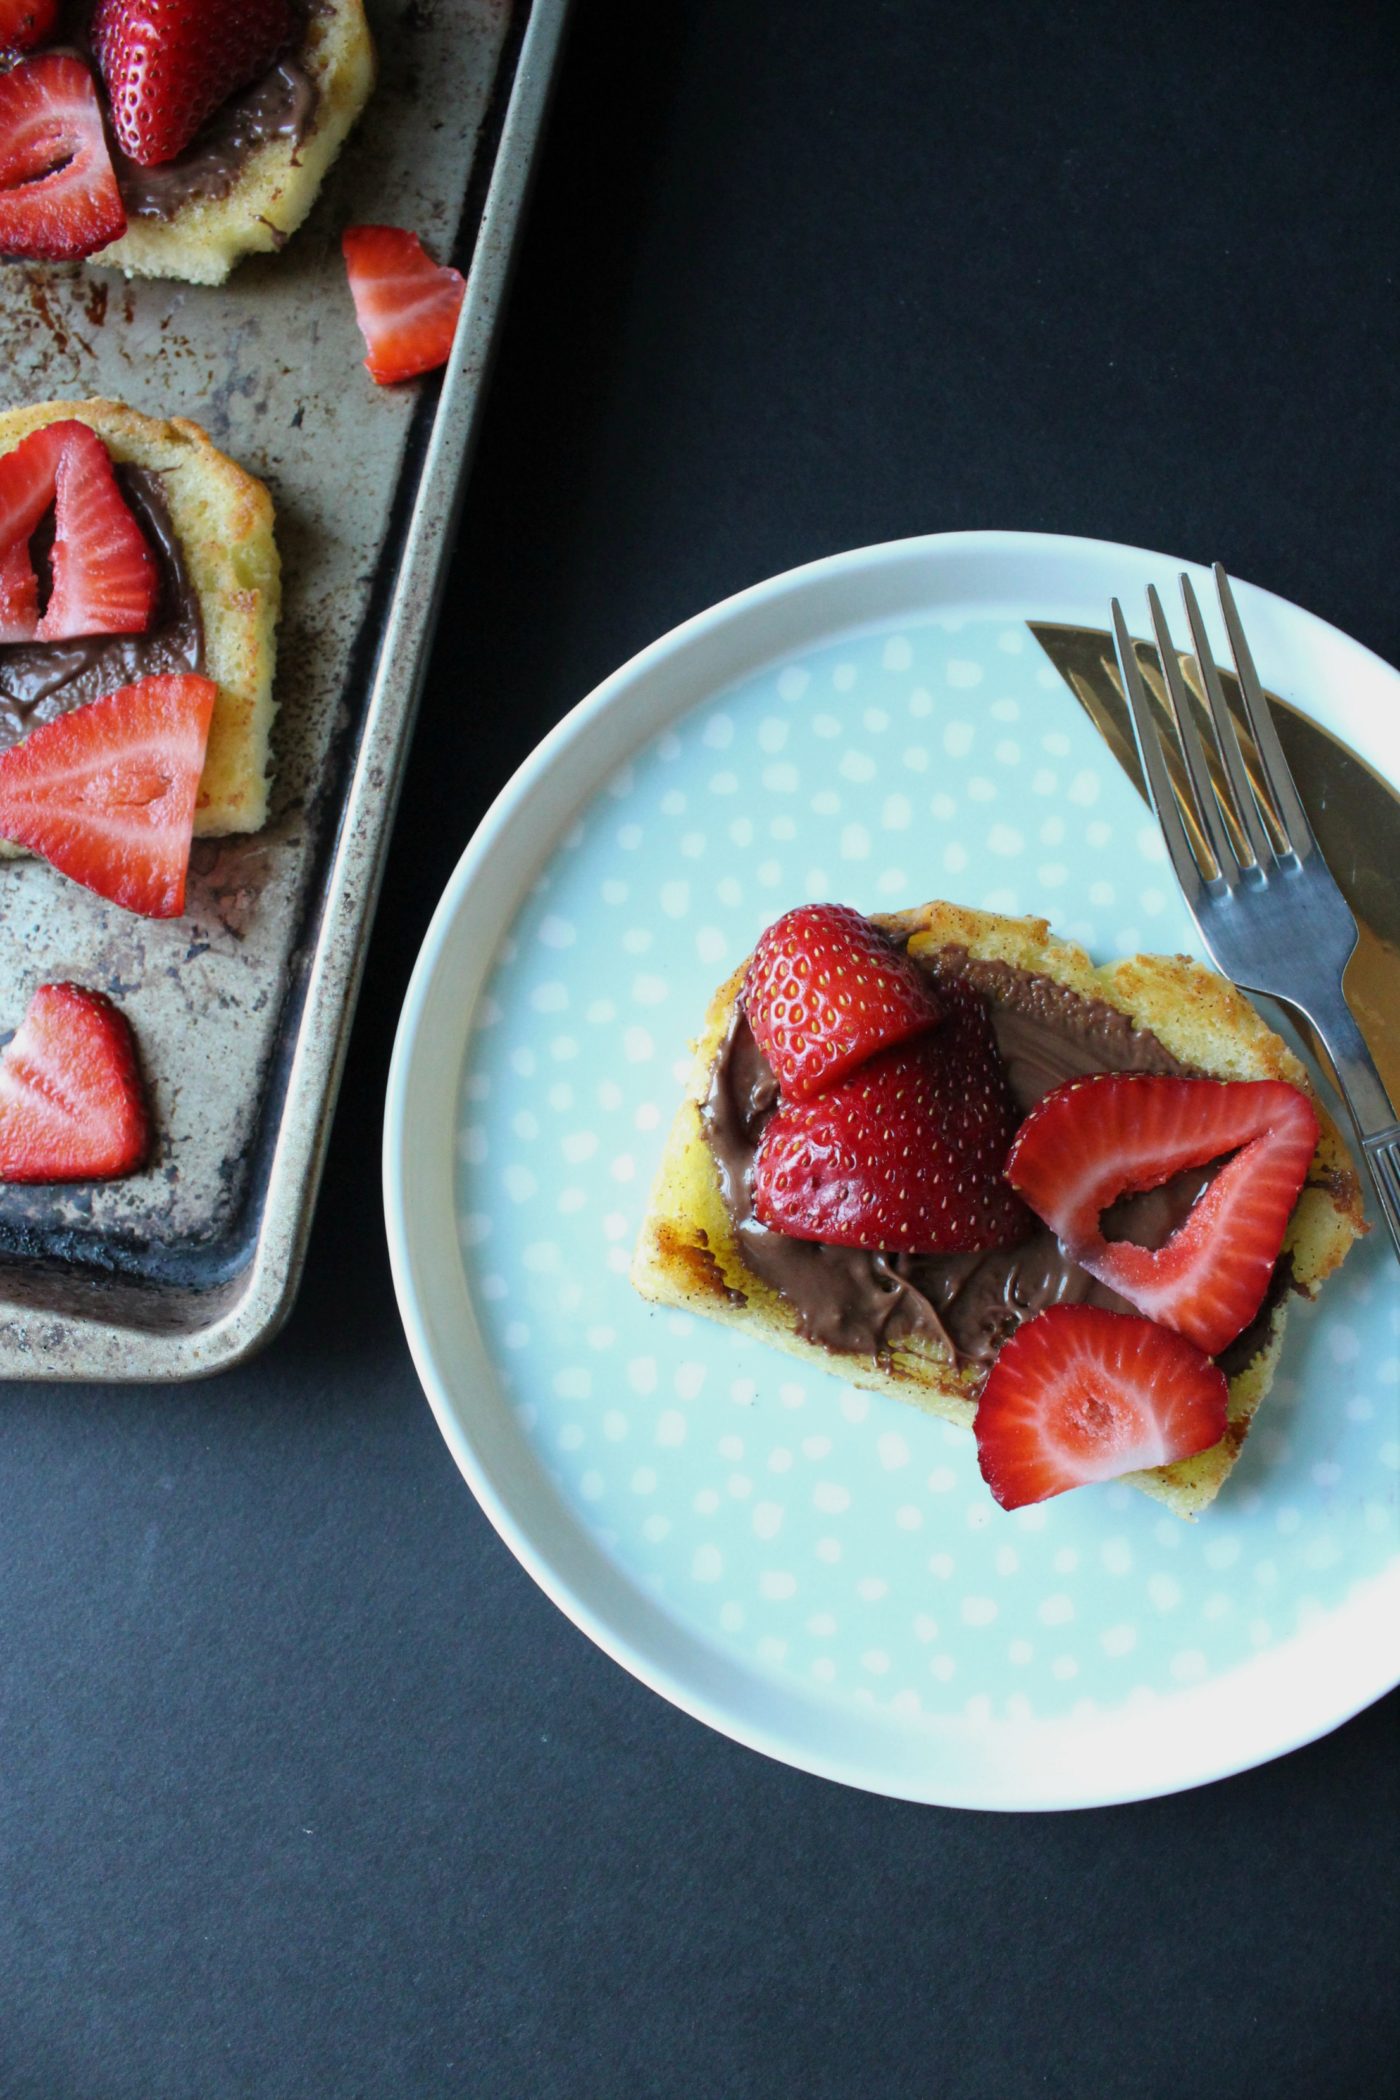 Summer desserts don't need to be overwhelming. Try this "fried" pound cake with Nutella and fresh strawberries. | via Eat.Drink.Frolic.